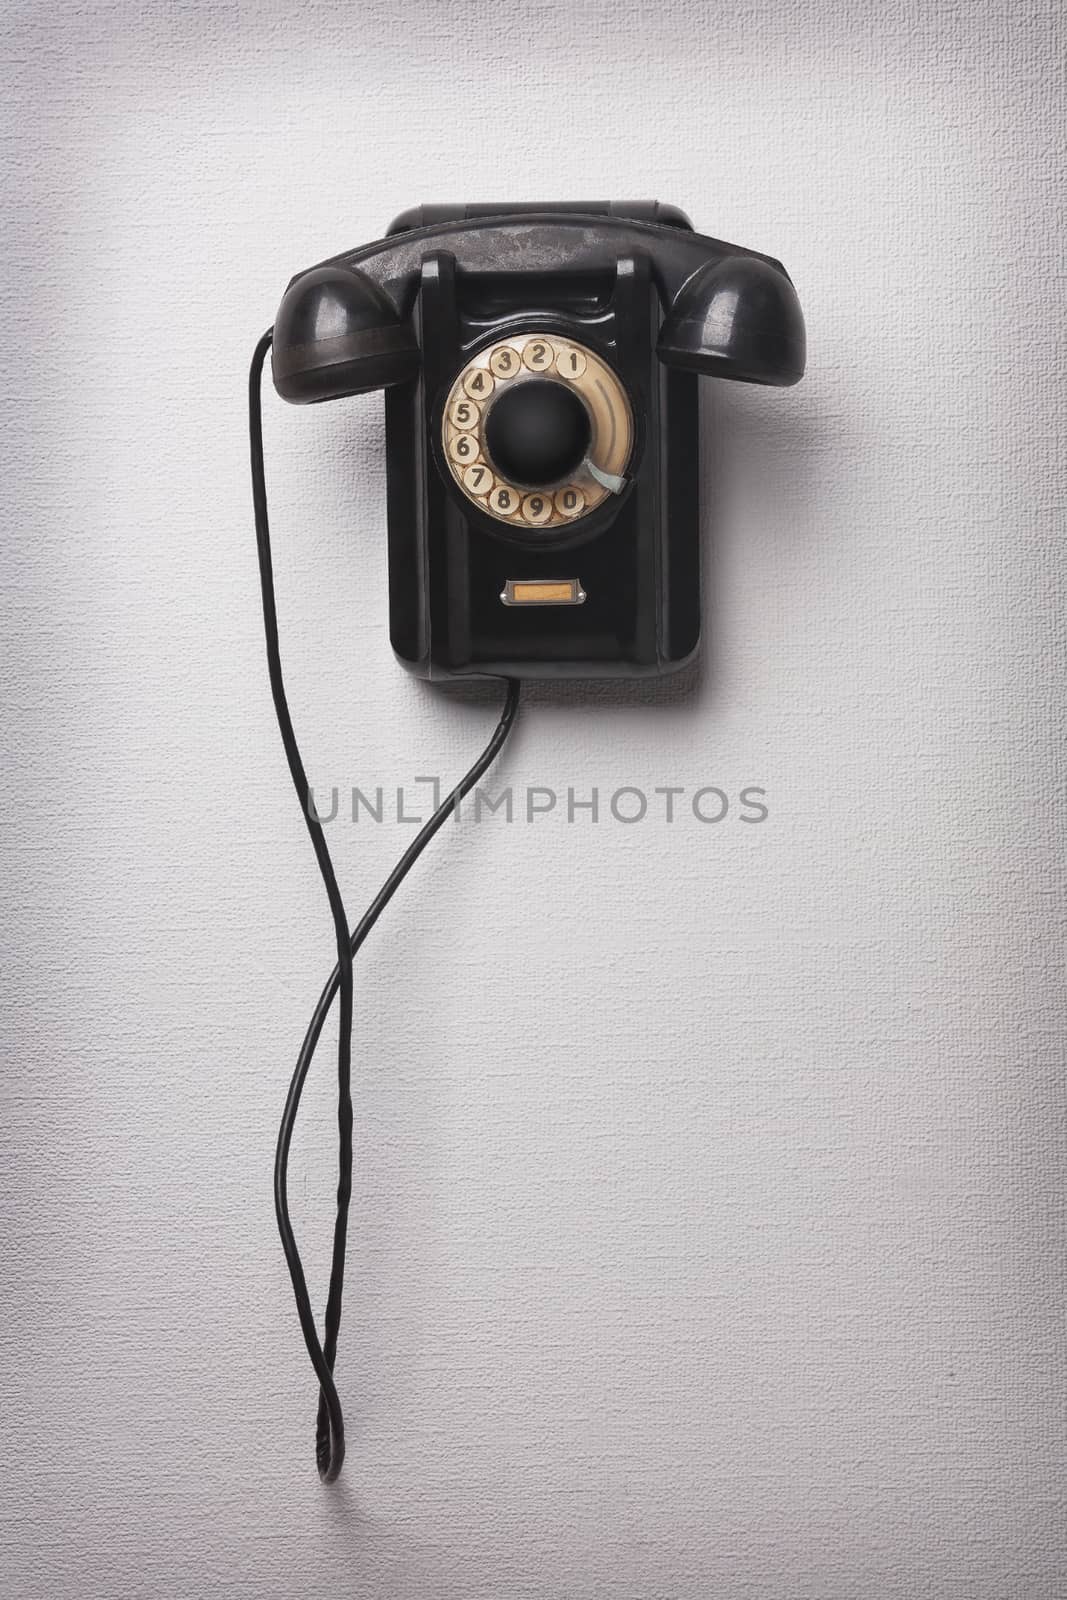 Old black rotational phone on wall